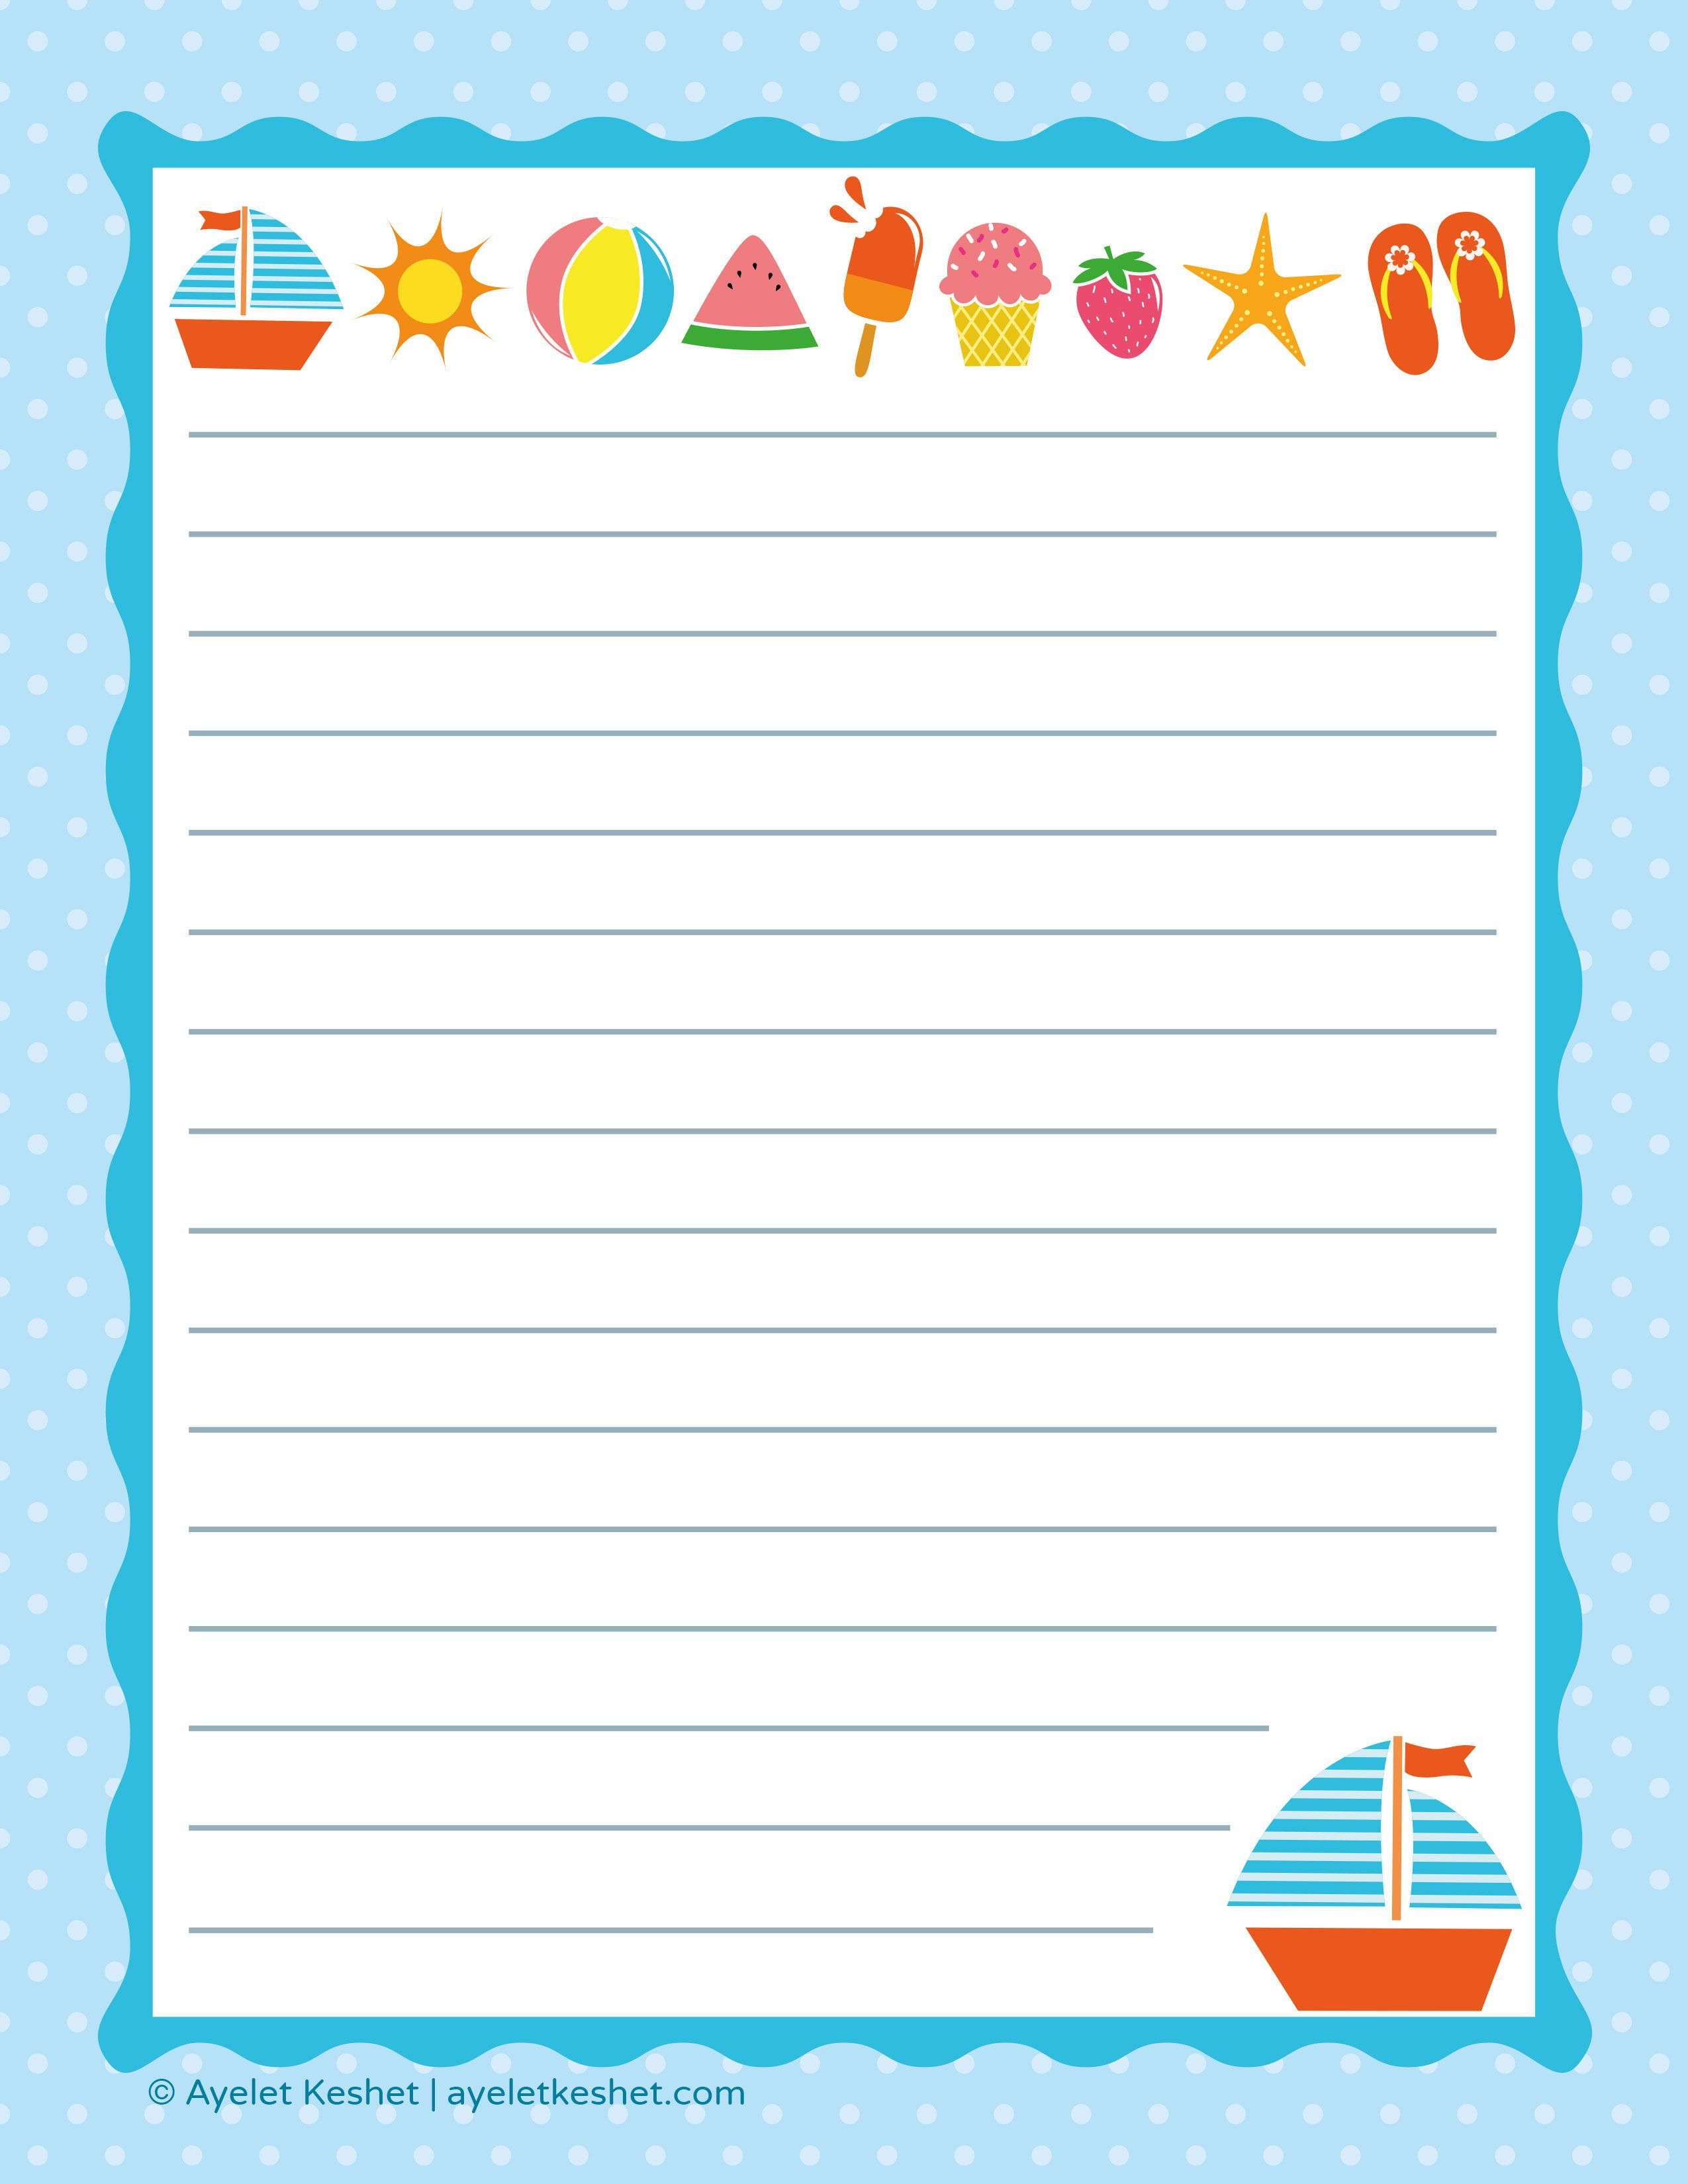 Free Printable Letter Paper | Printables To Go | Pinterest - Free Printable Writing Paper For Adults